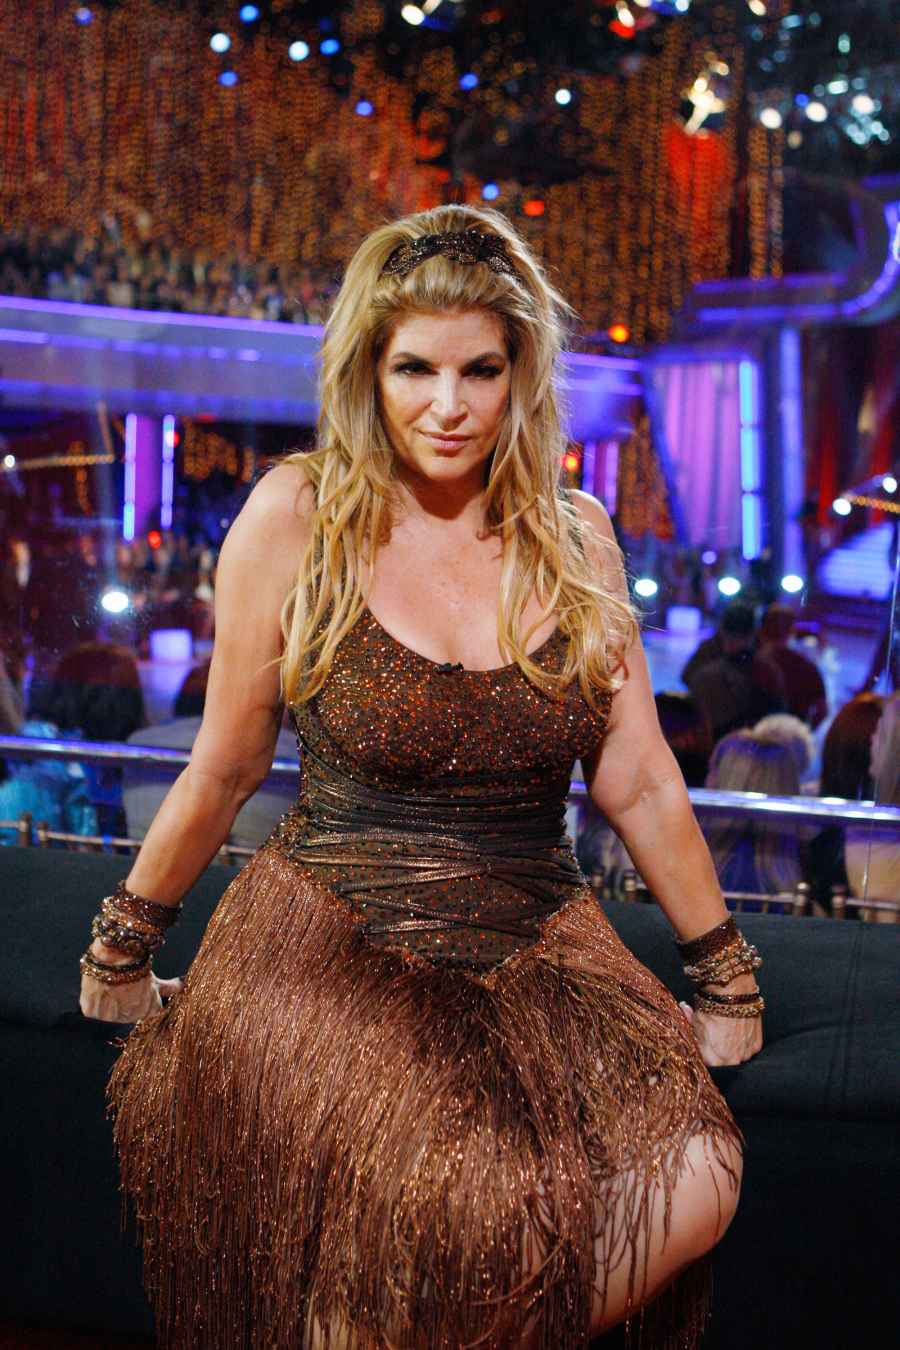 Kirstie Alley's Most Outrageous Statements